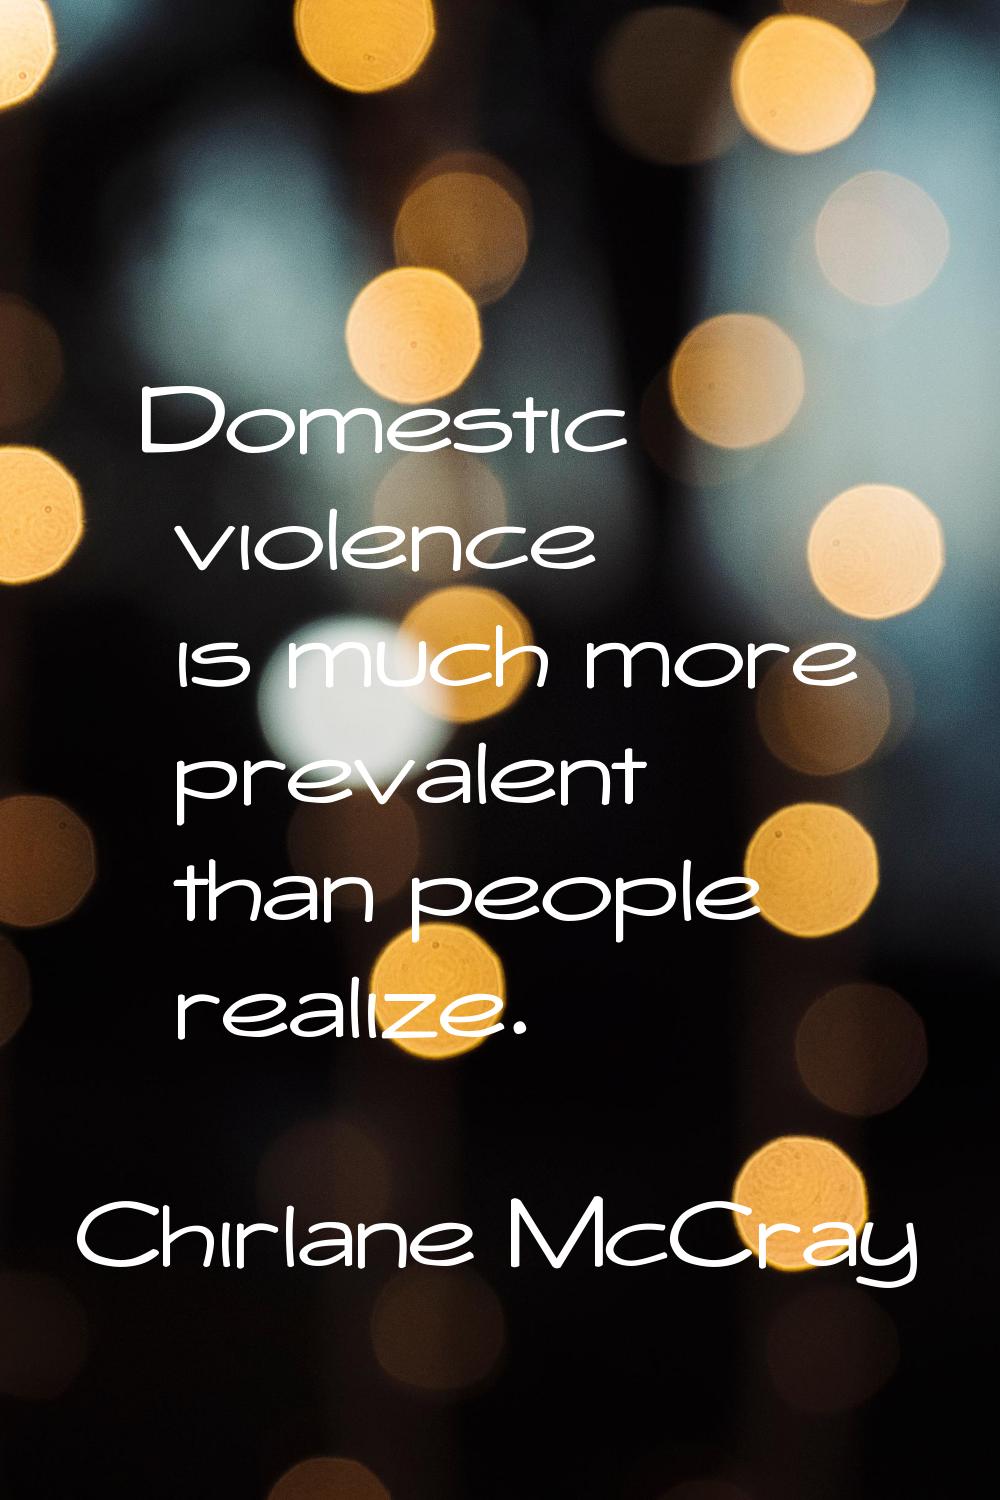 Domestic violence is much more prevalent than people realize.